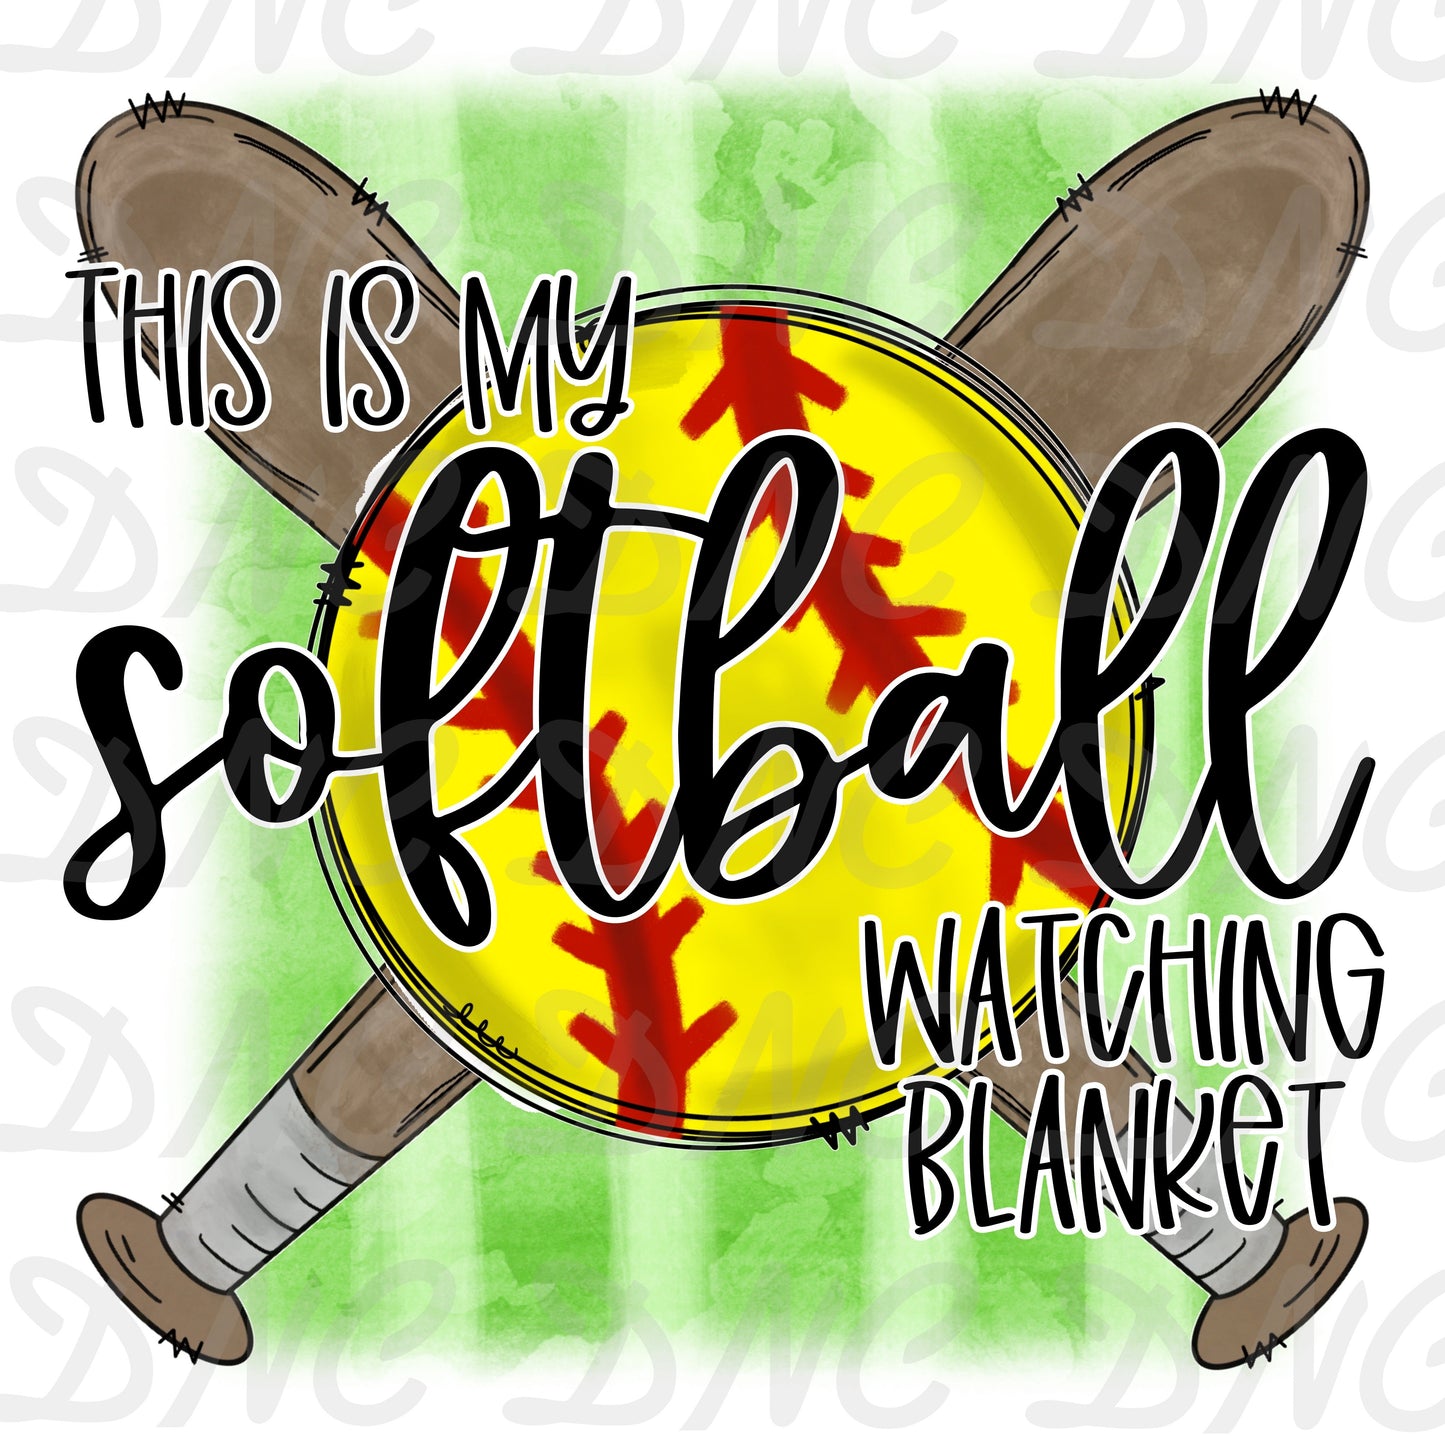 This is my softball watching blanket - Sublimation